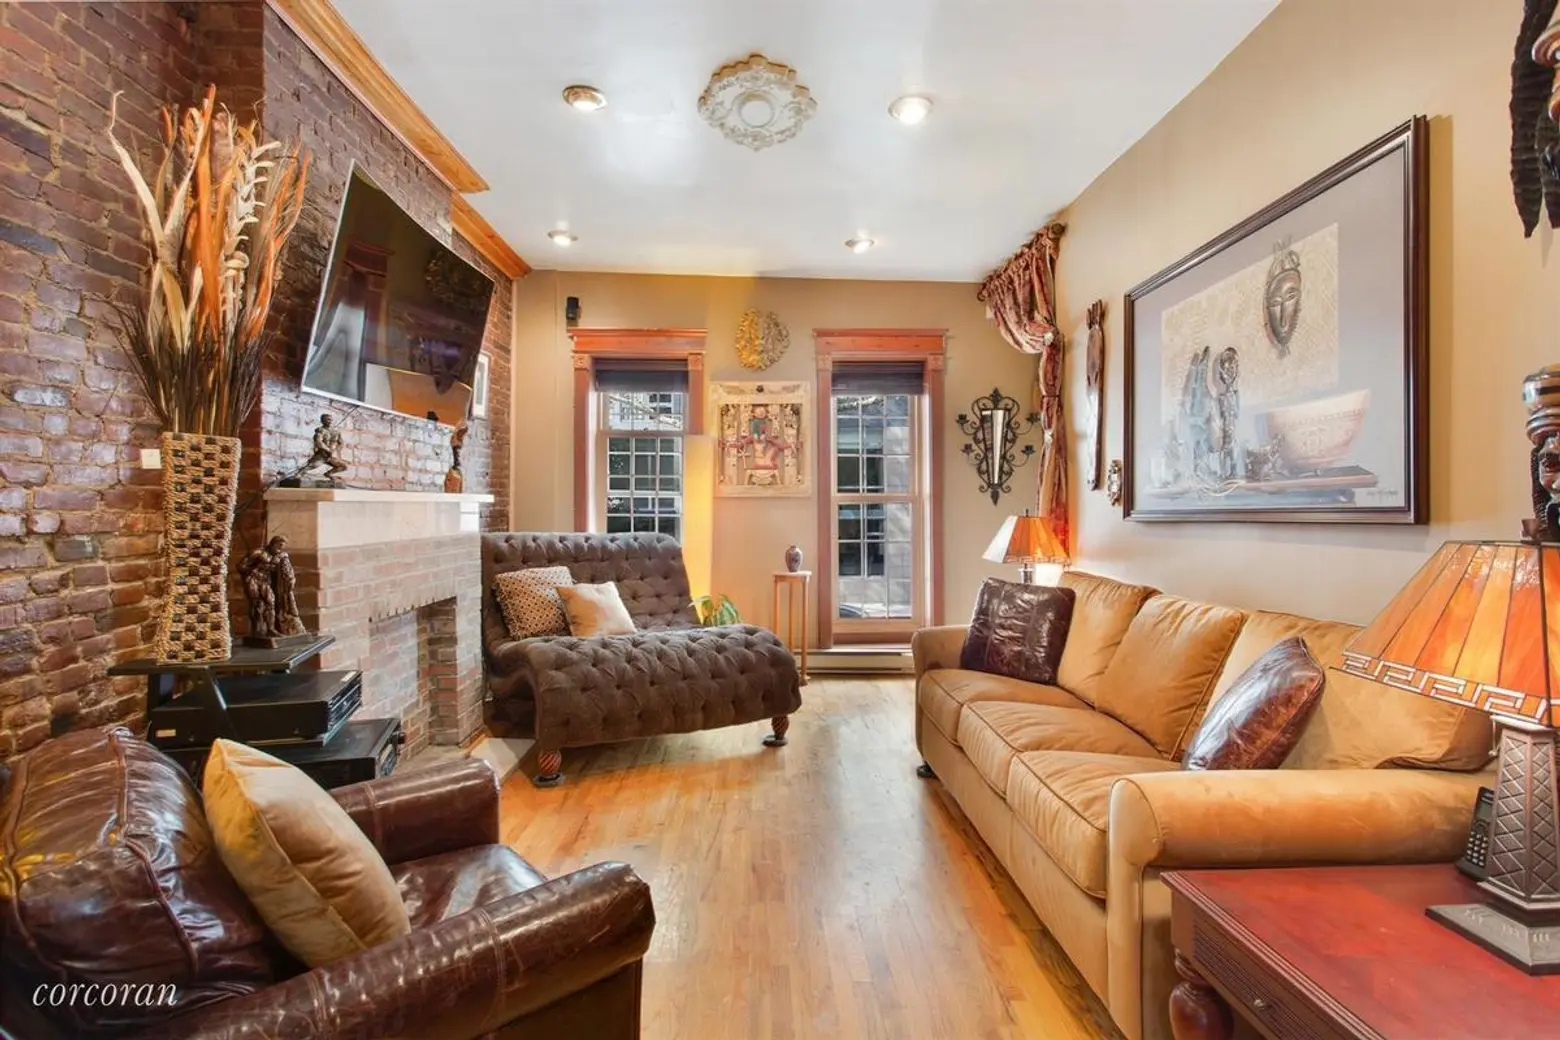 This $1.9M Clinton Hill townhouse is a bountiful harvest of toned-down brown